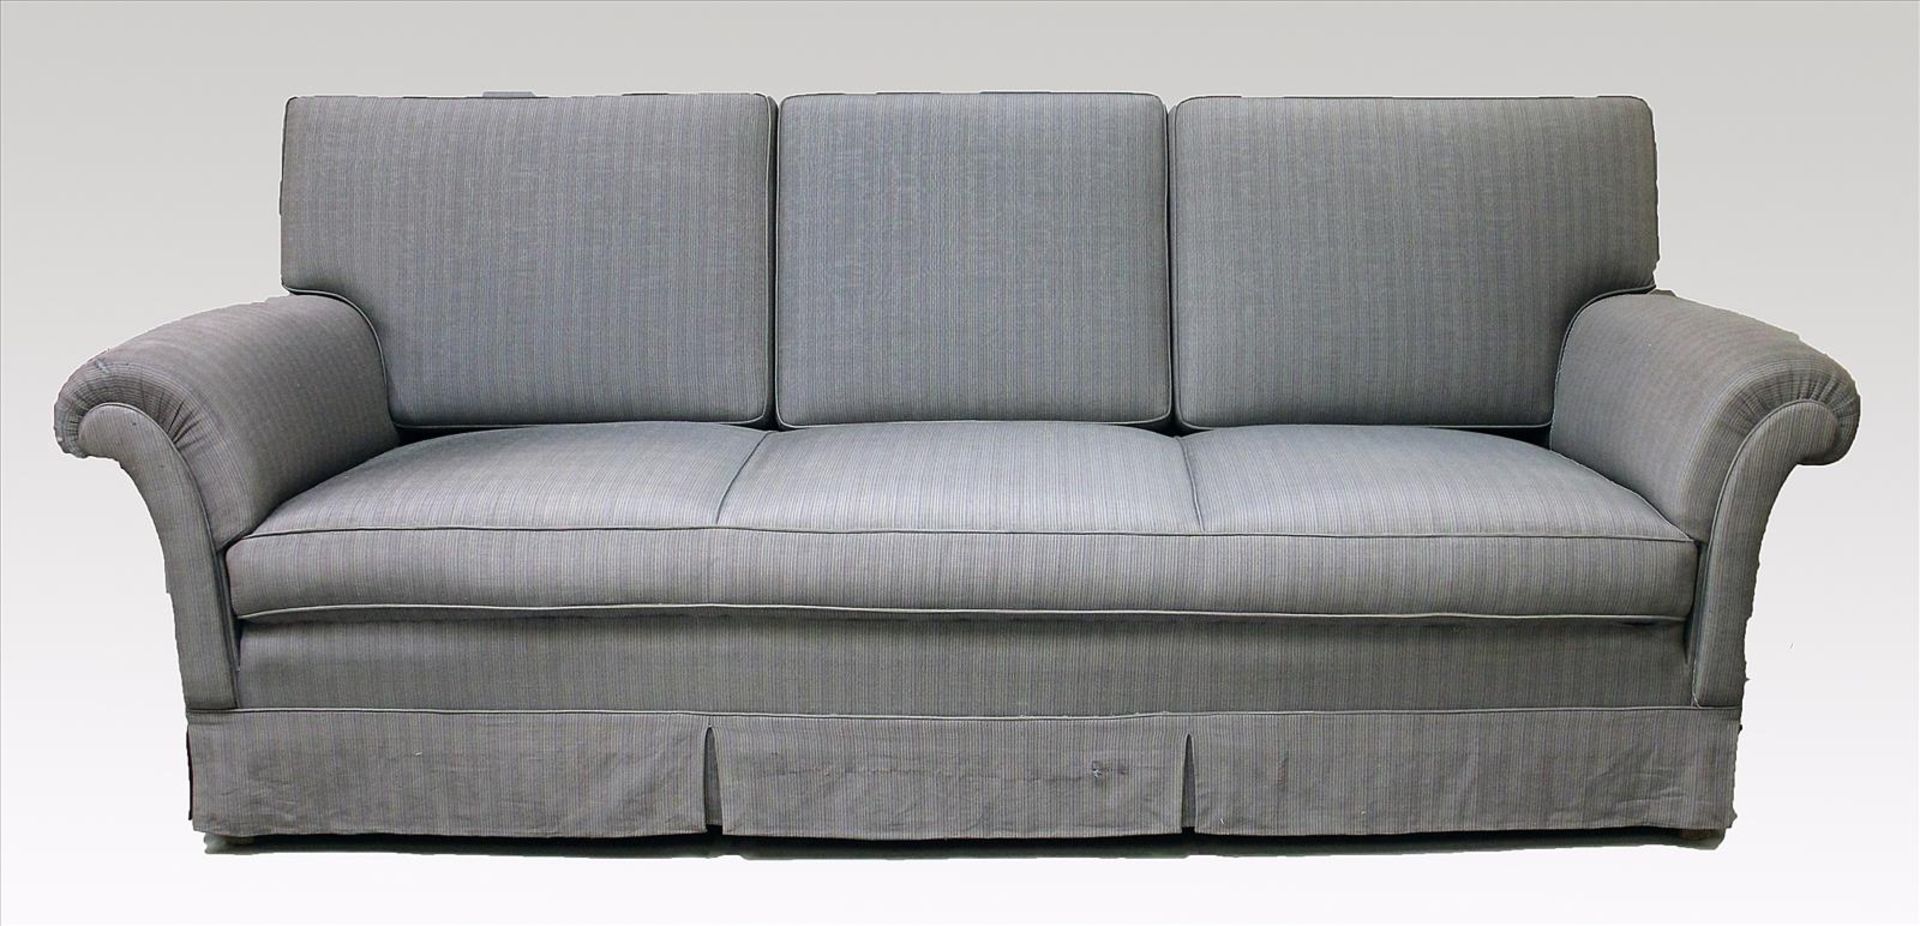 Moderne Couch.